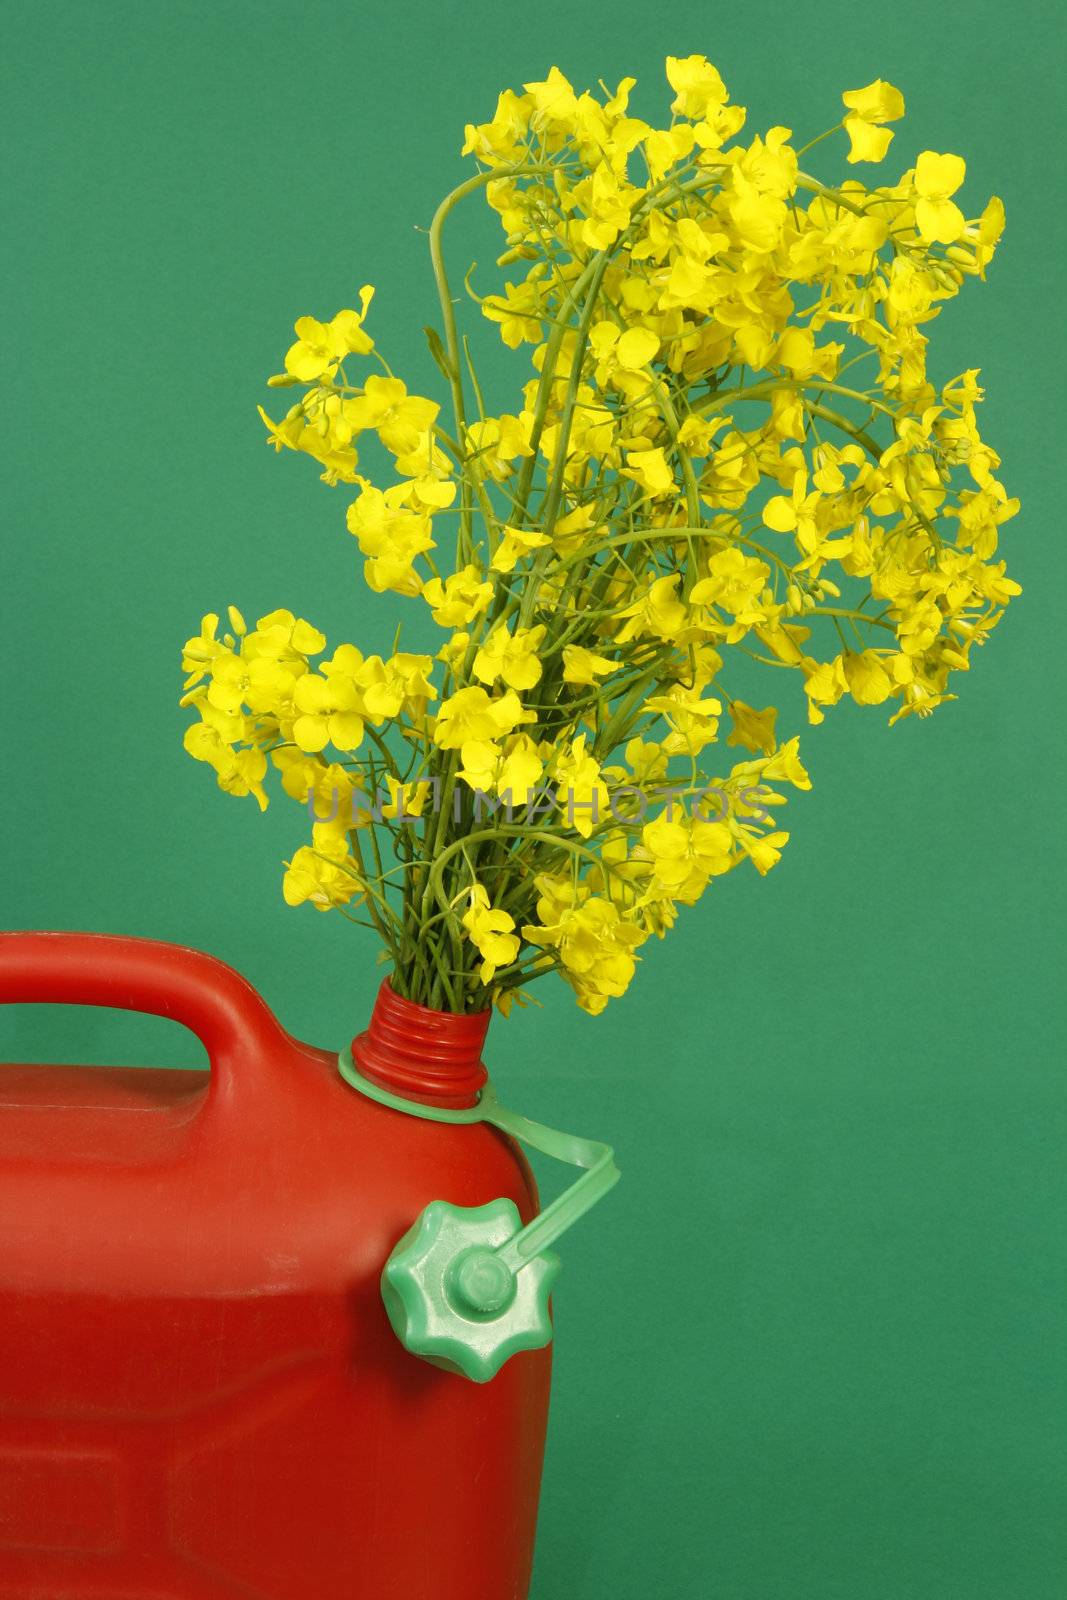 Red jerrycan with yellow blooming rape over green background